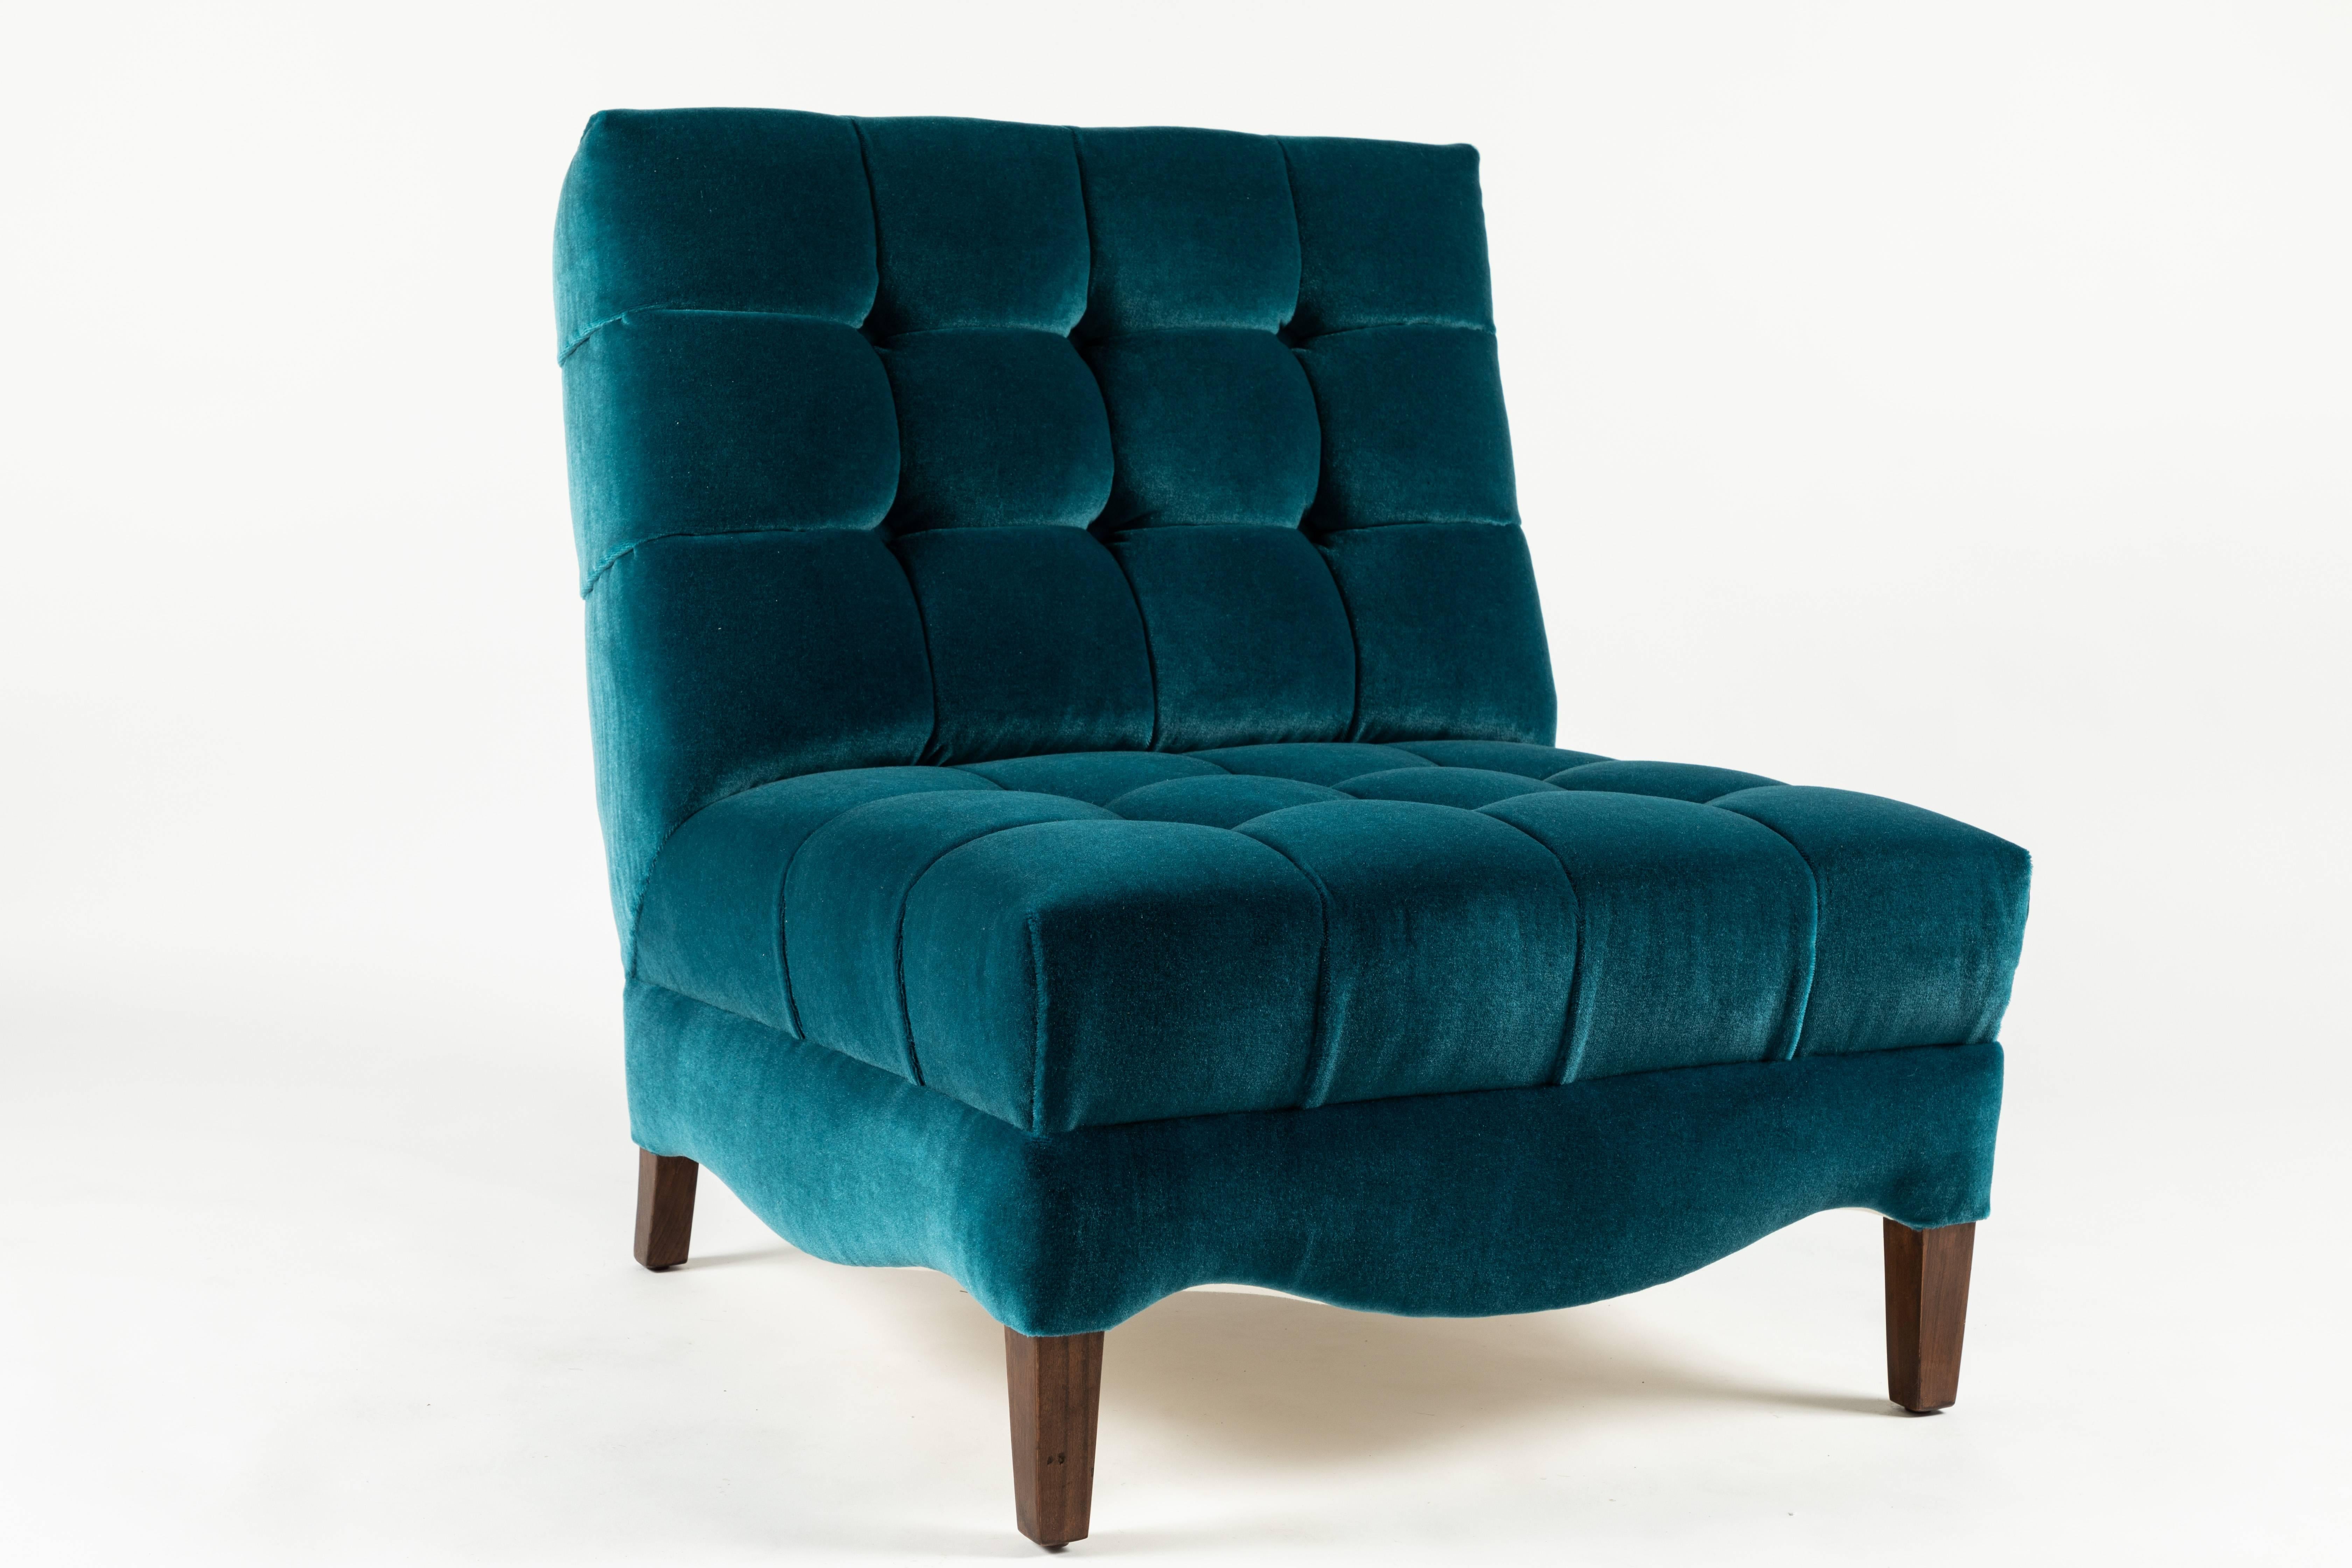 Pair of biscuit-tufted slipper chairs covered in teal mohair, 1940s.